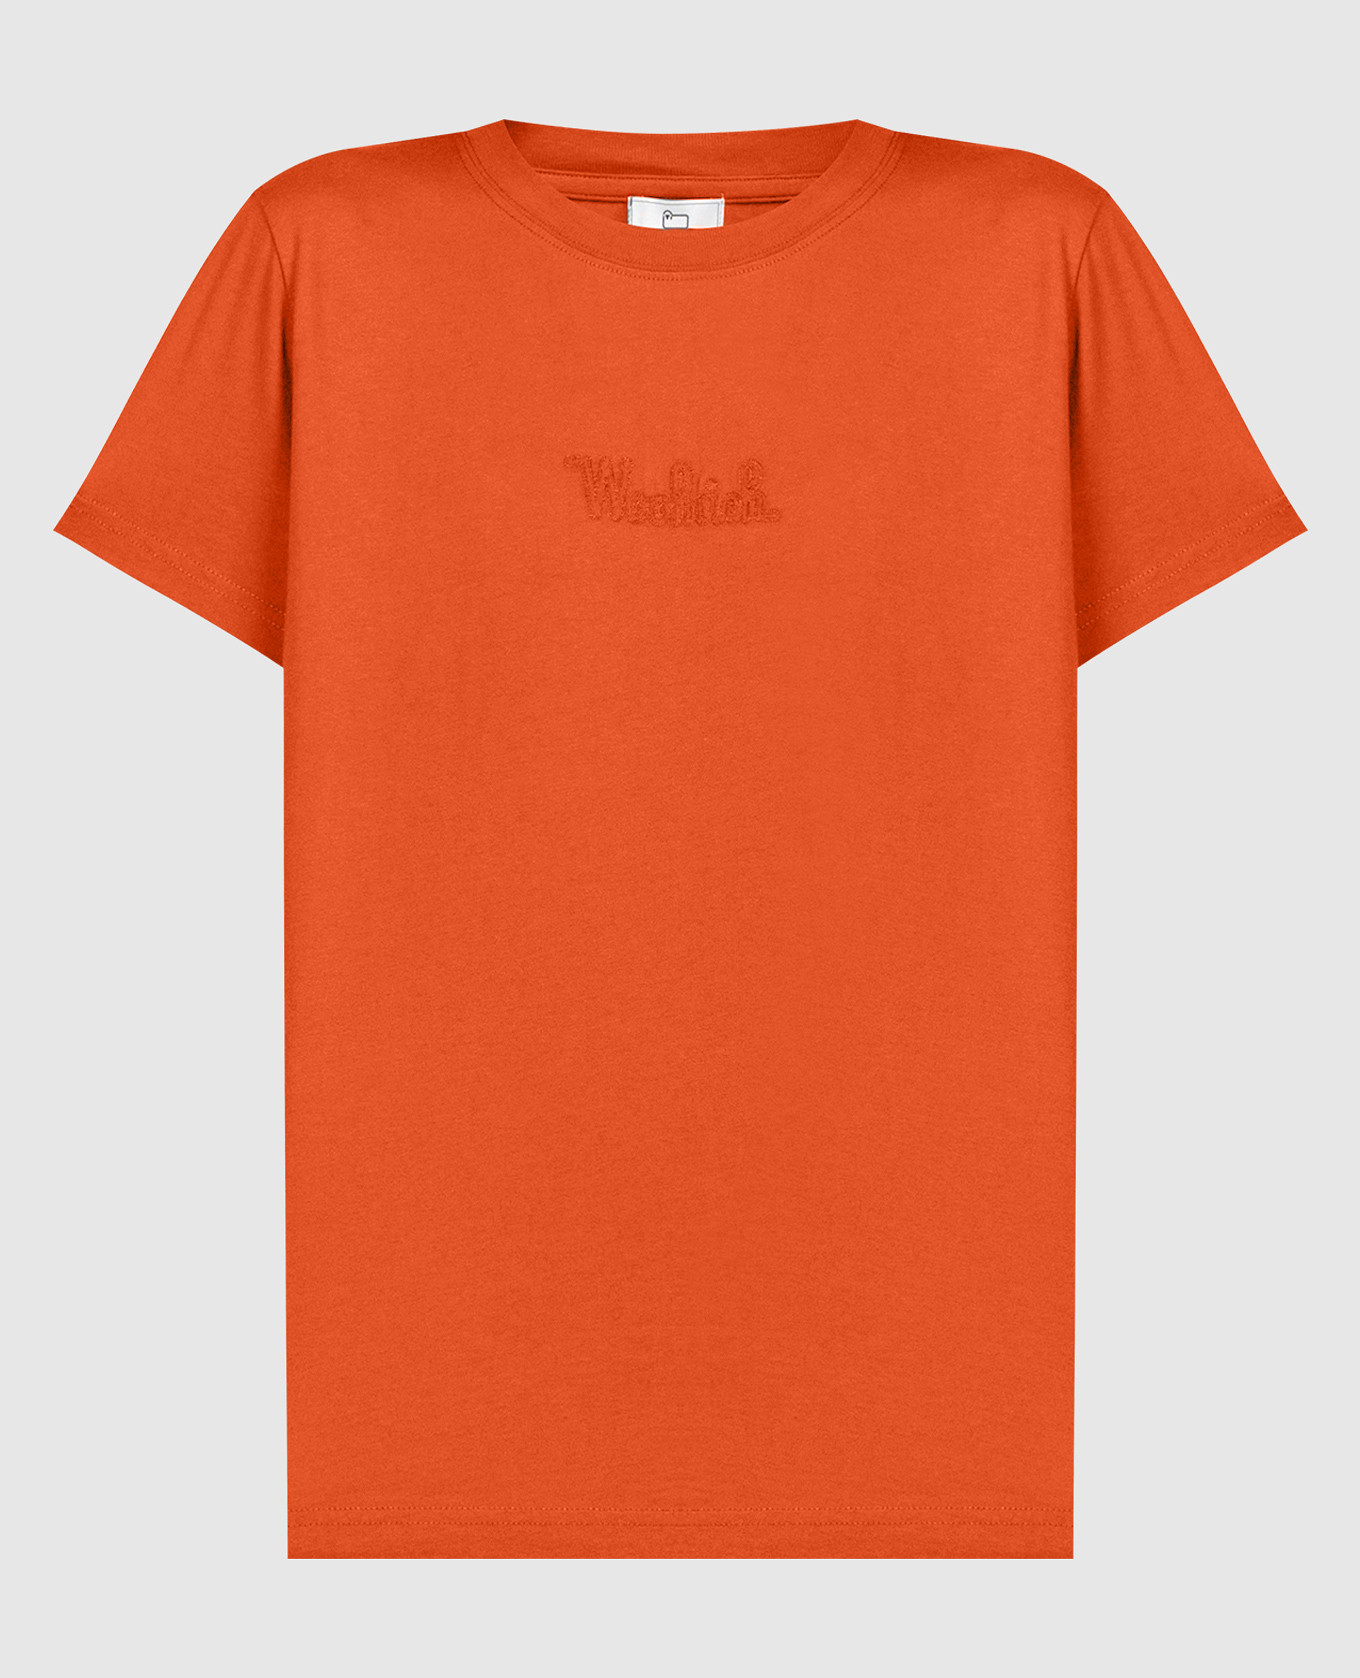 Orange t-shirt with logo embroidery